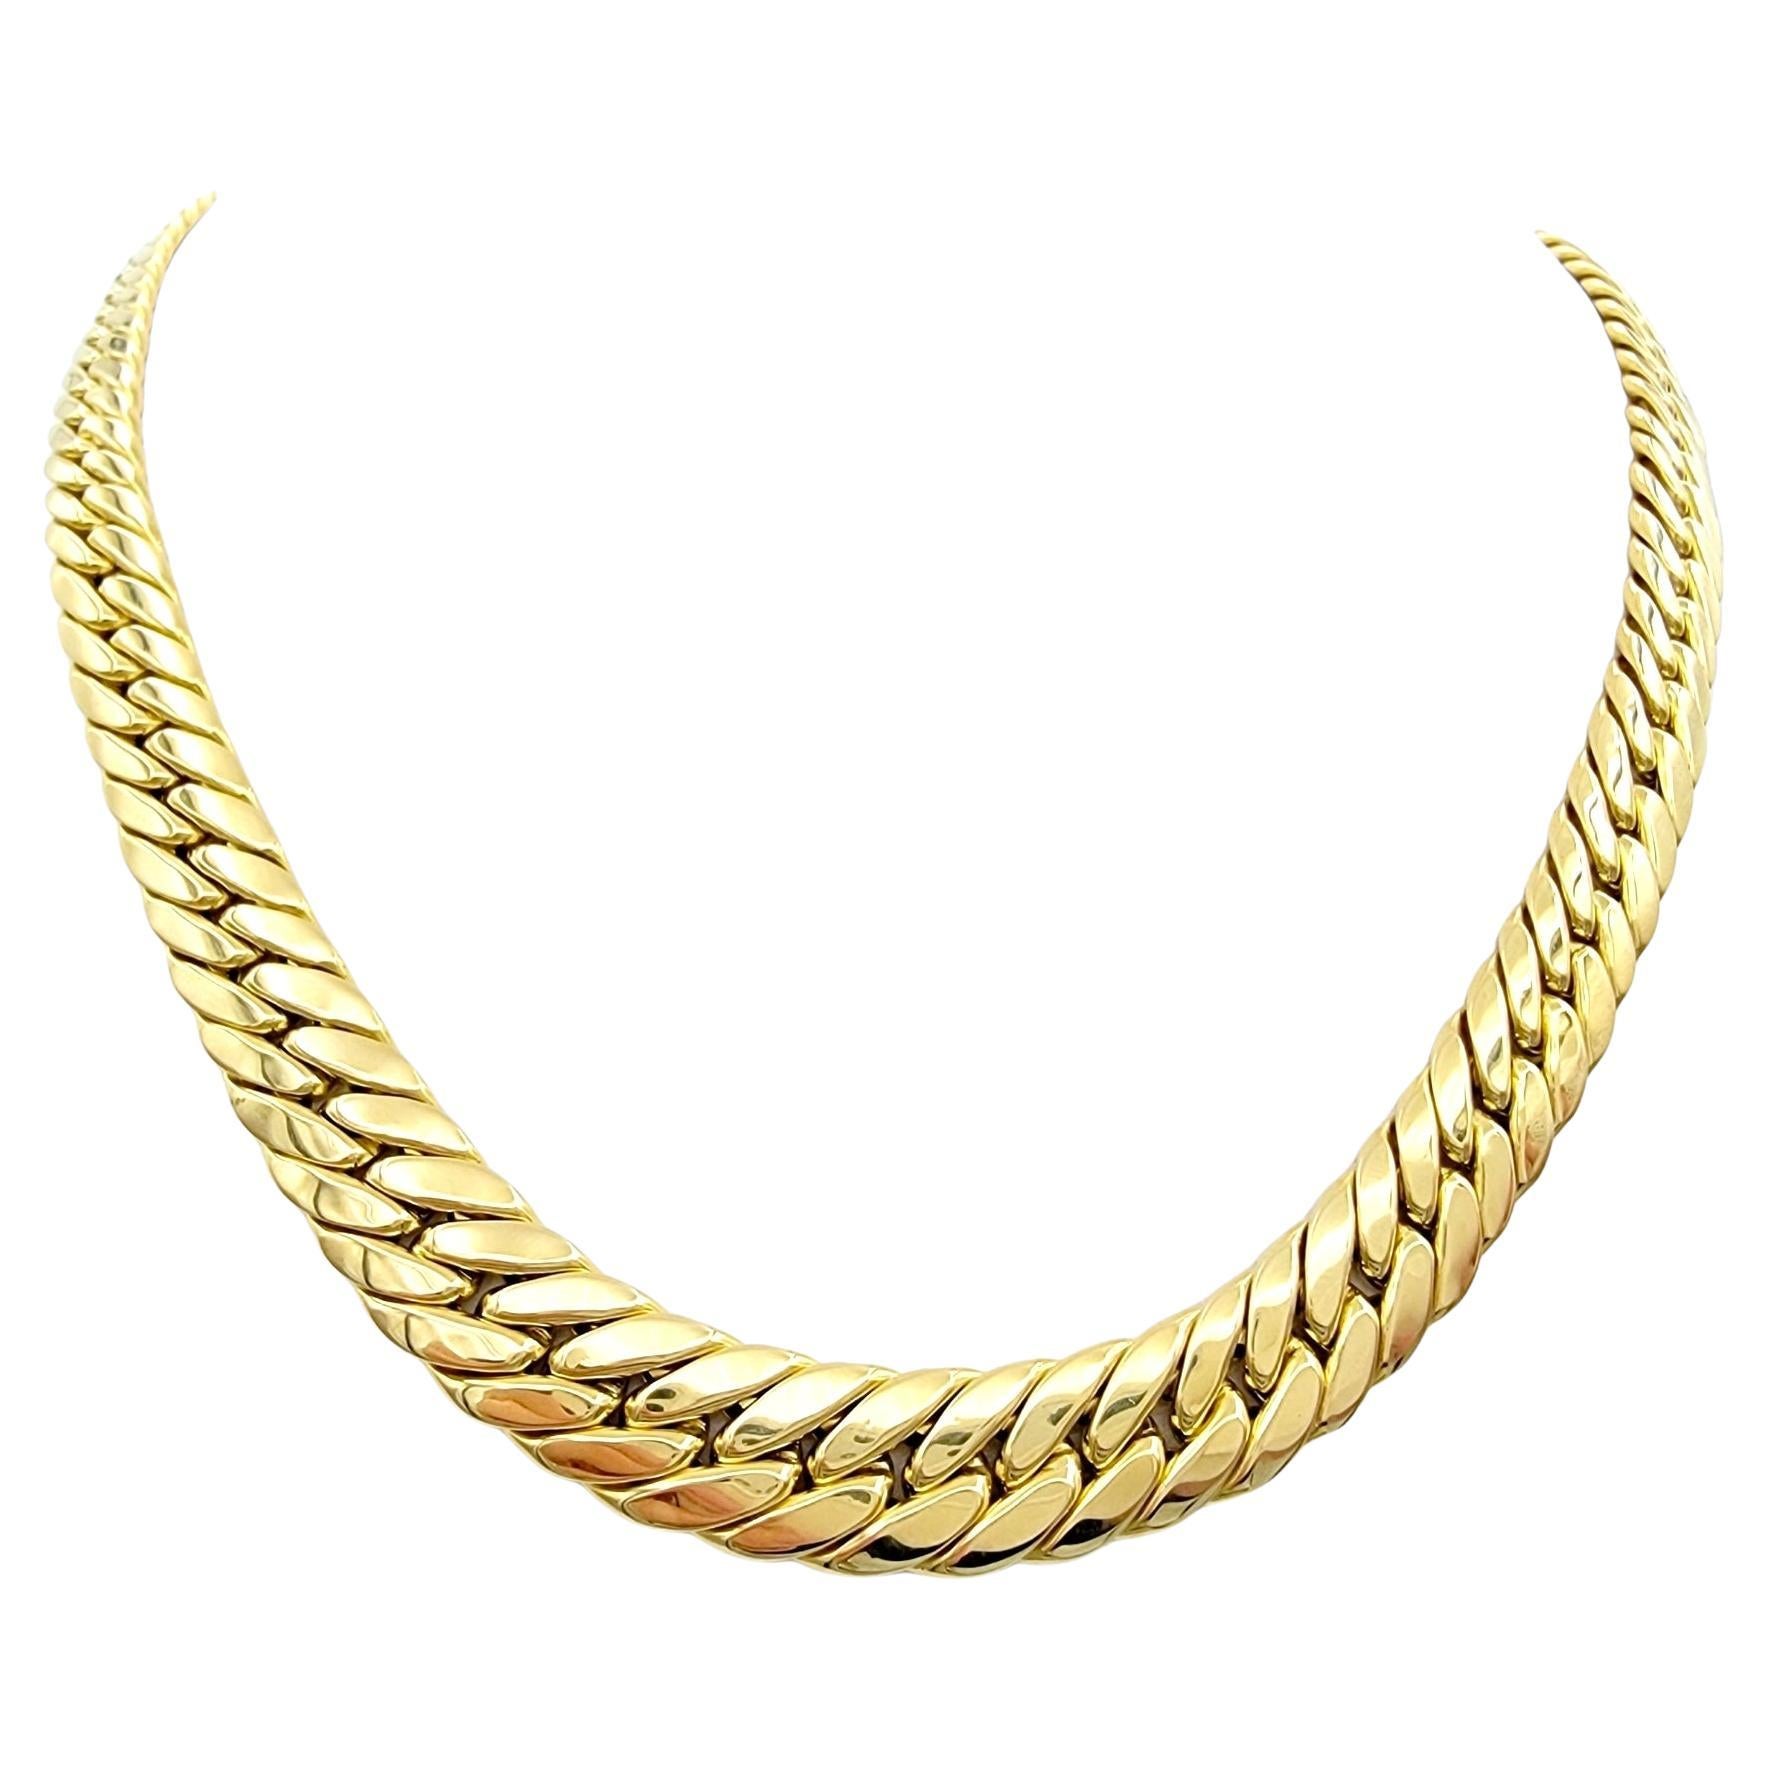 Chunky Graduated Curb Link Chain Necklace in Polished 18 Karat Yellow Gold For Sale